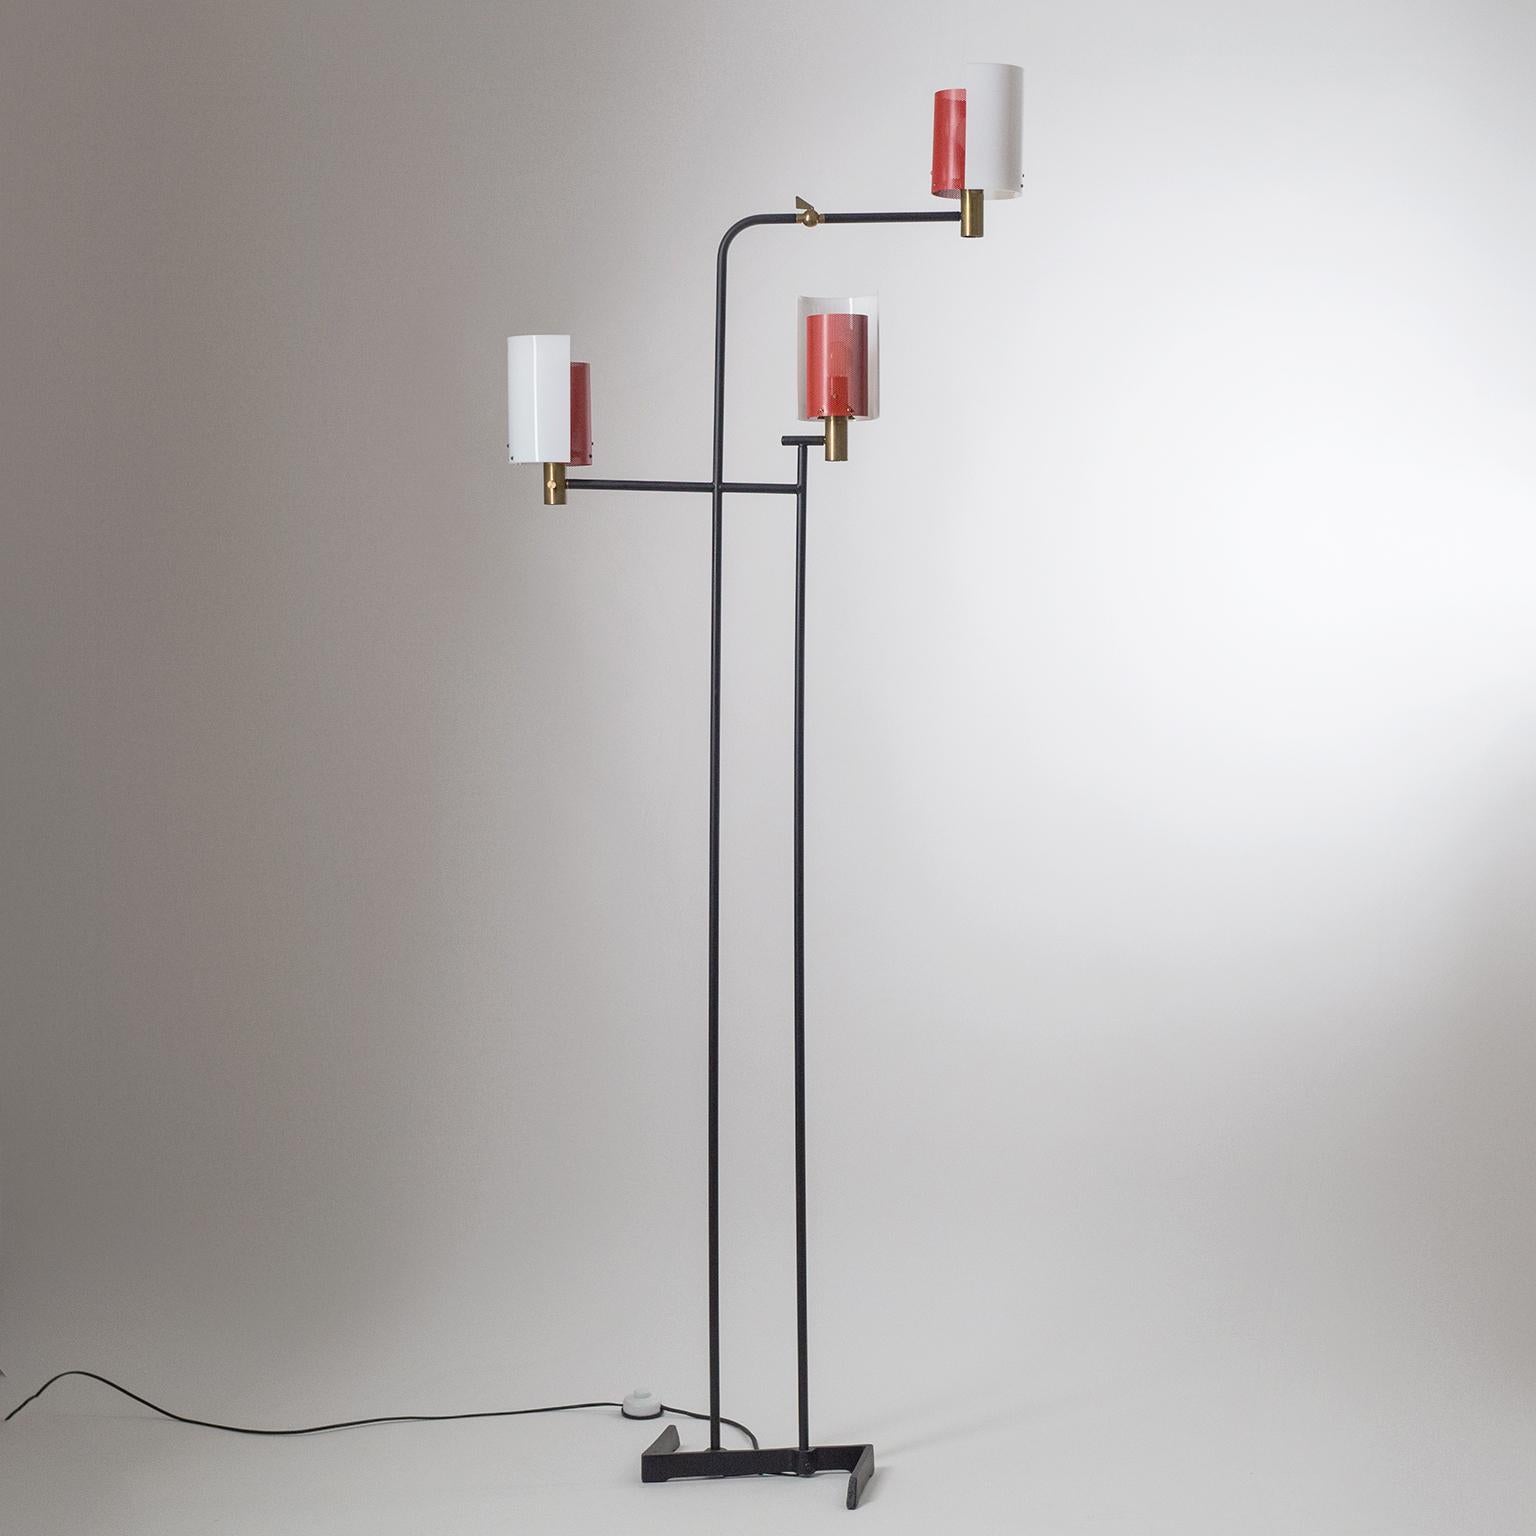 Rare large Italian three-arm floor lamp from the 1950s. Very unique modernist and sculptural design with black lacquered steel/iron structure and diffusers made of brass, acrylic and red perforated steel. Each arm has an original brass E14 socket